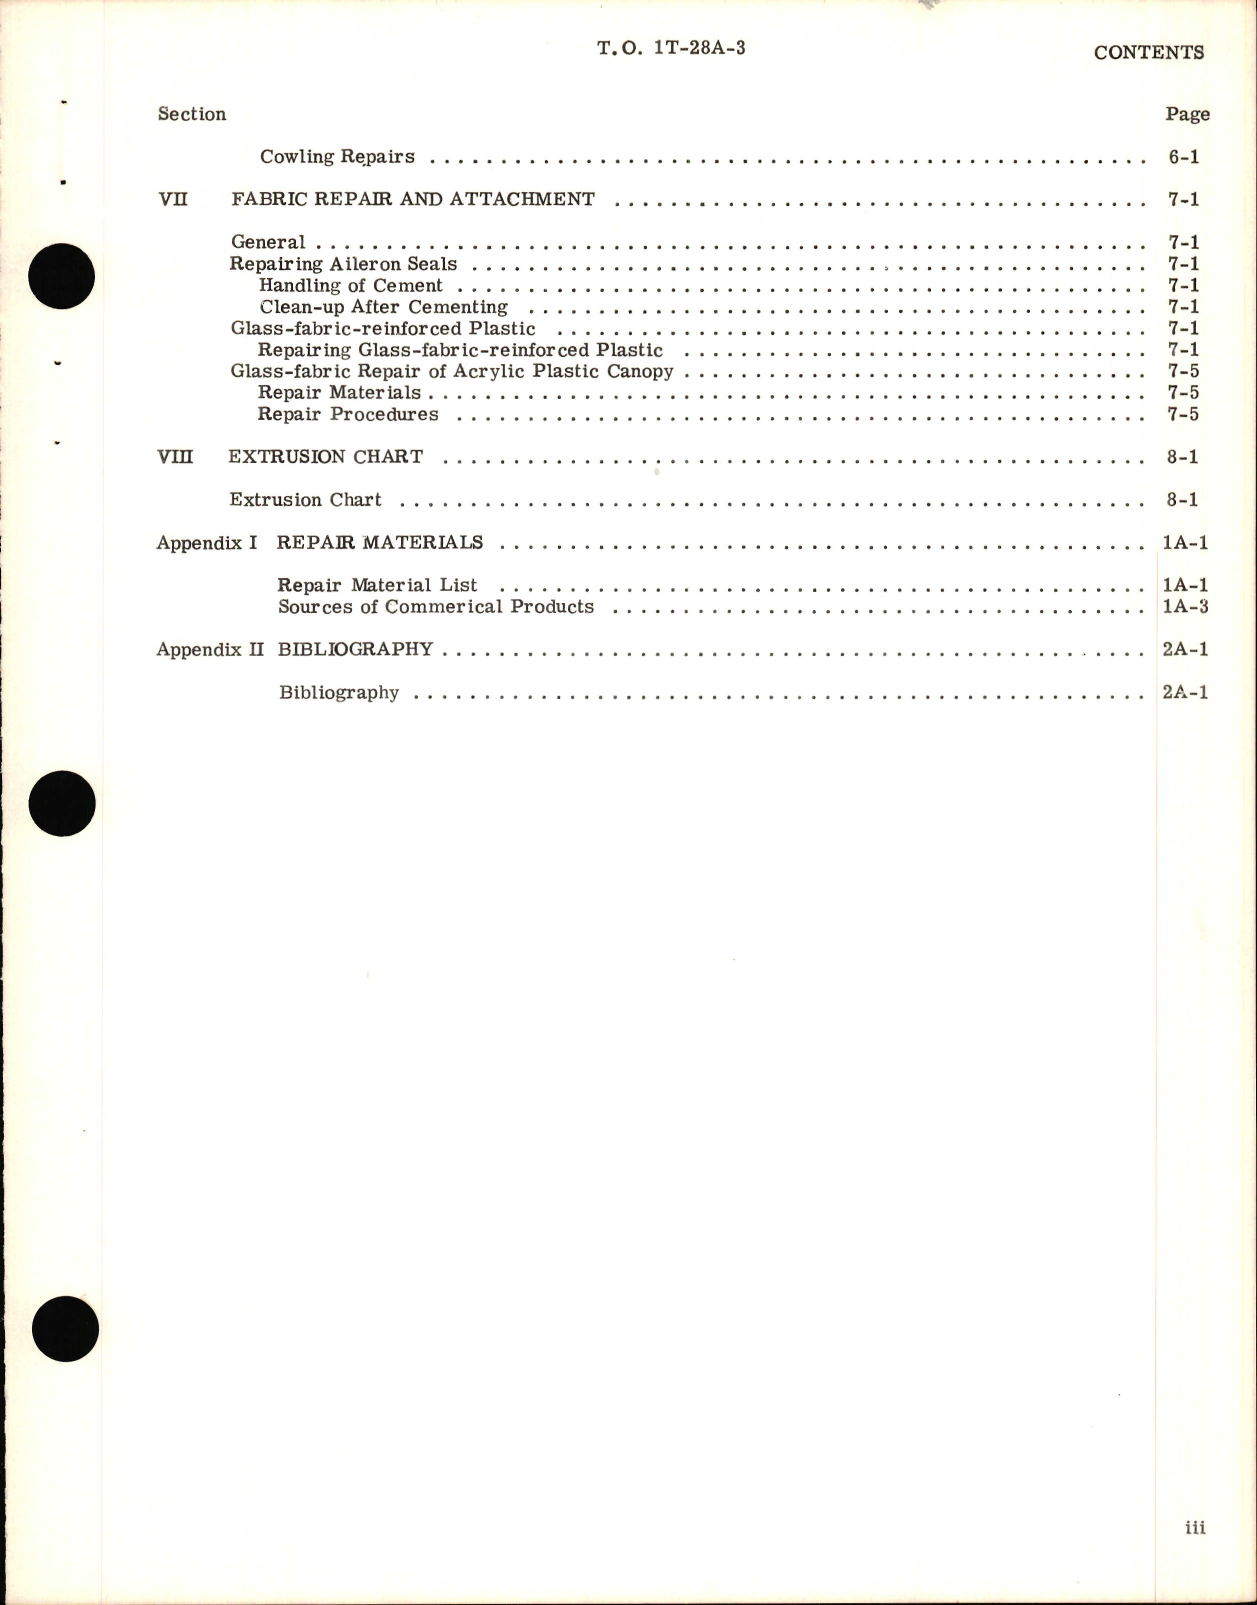 Sample page 5 from AirCorps Library document: Structural Repair Instructions Manual for T-28A